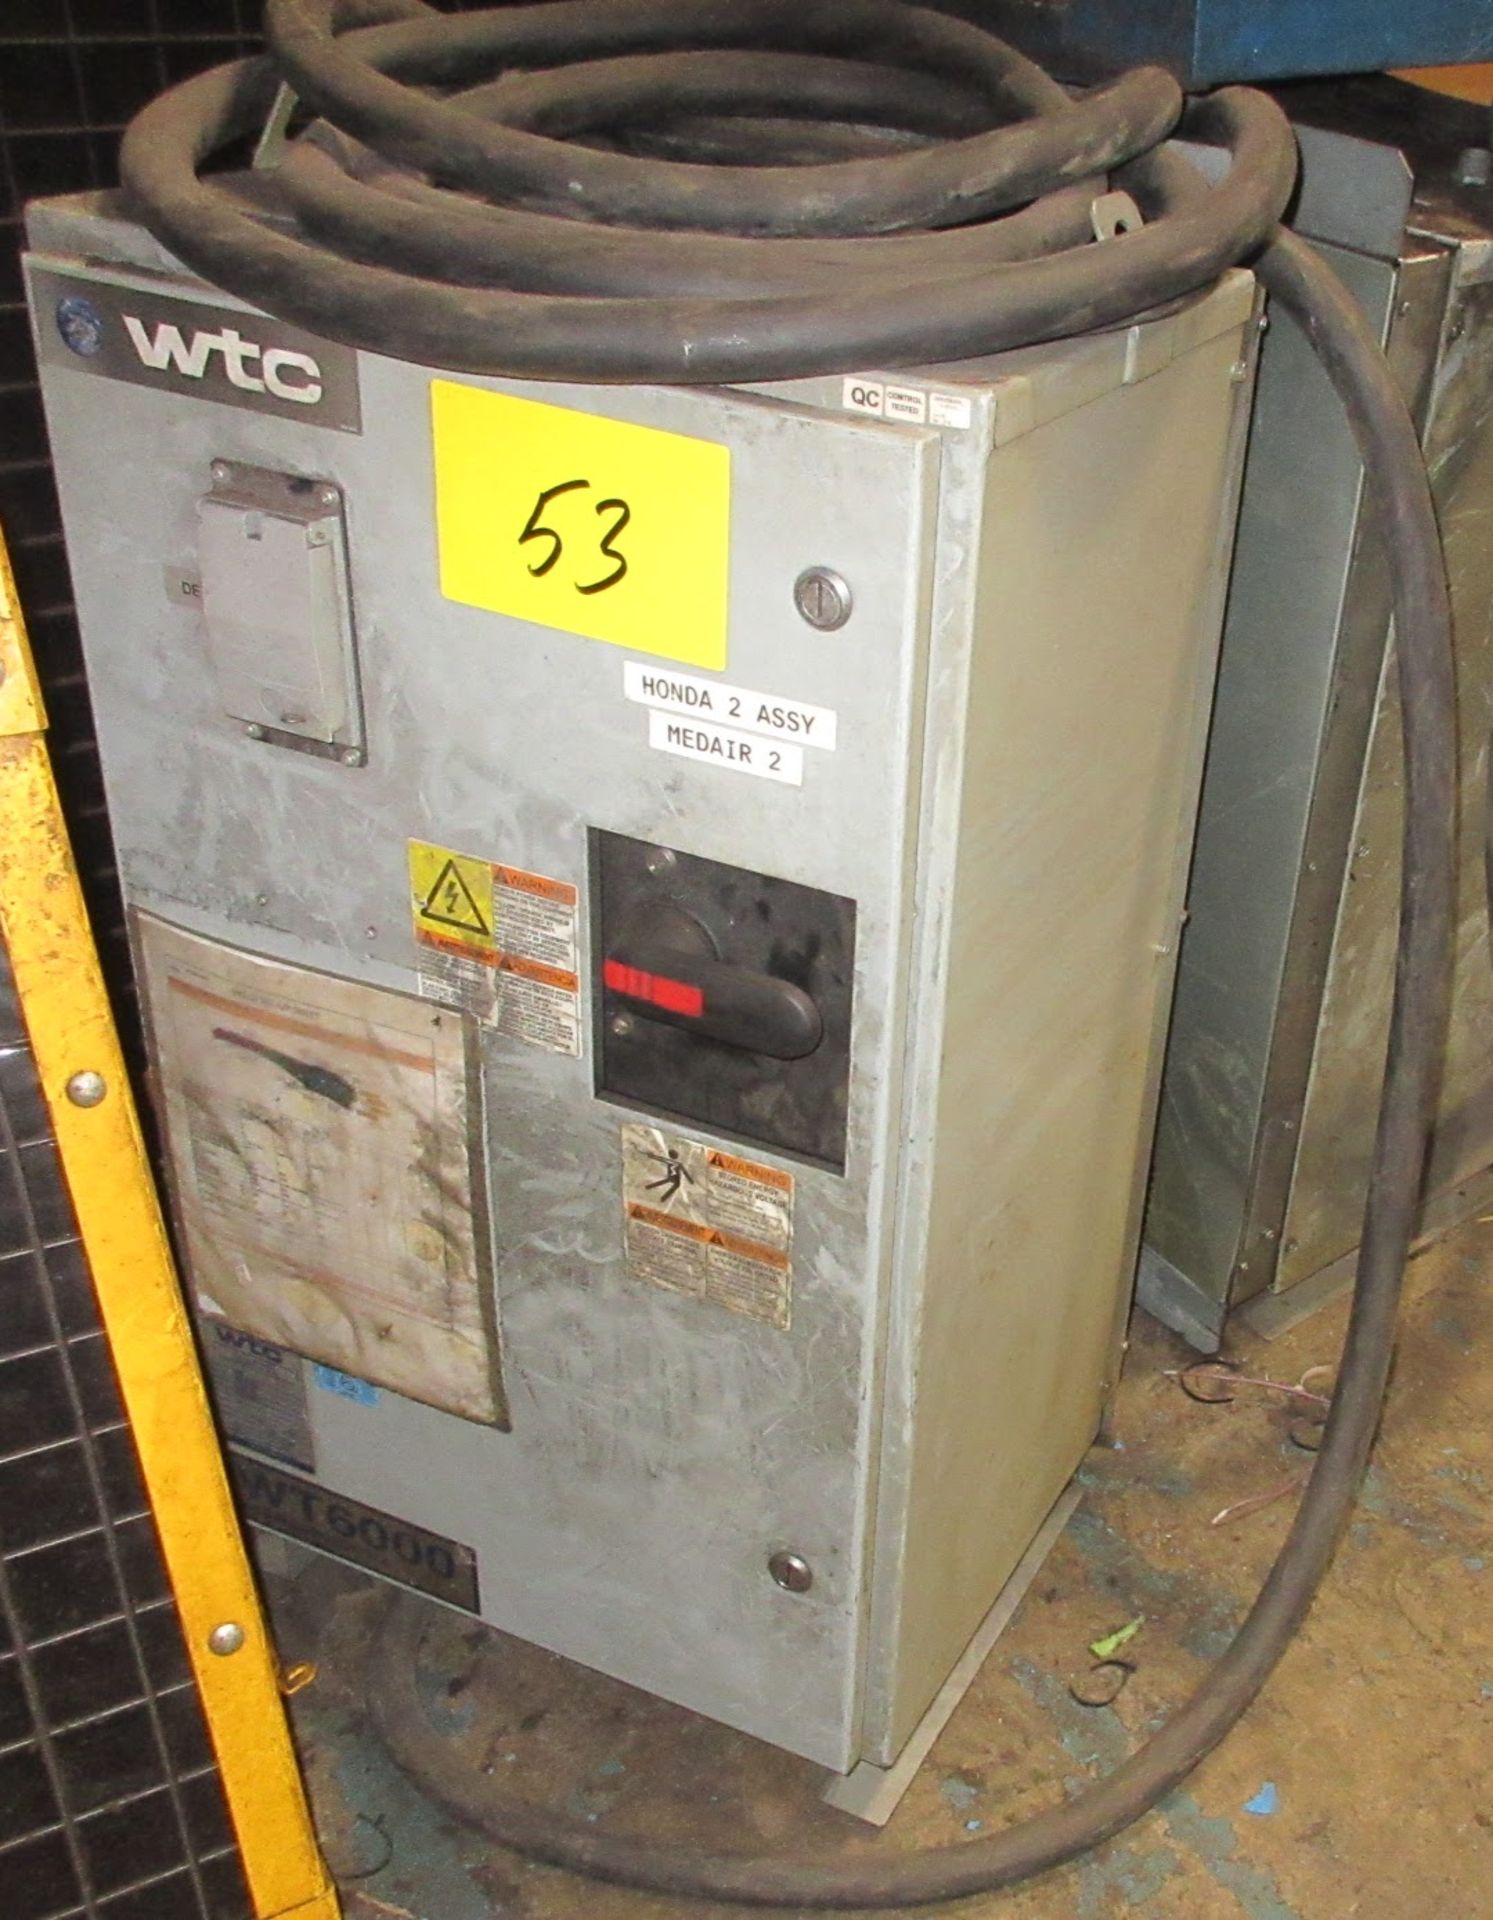 LOT OF (2) WTC ELECTRICAL PANELS W/ CABLES (NOTE: NO WIRING COMING OUT OF PANEL) (LOCATED IN